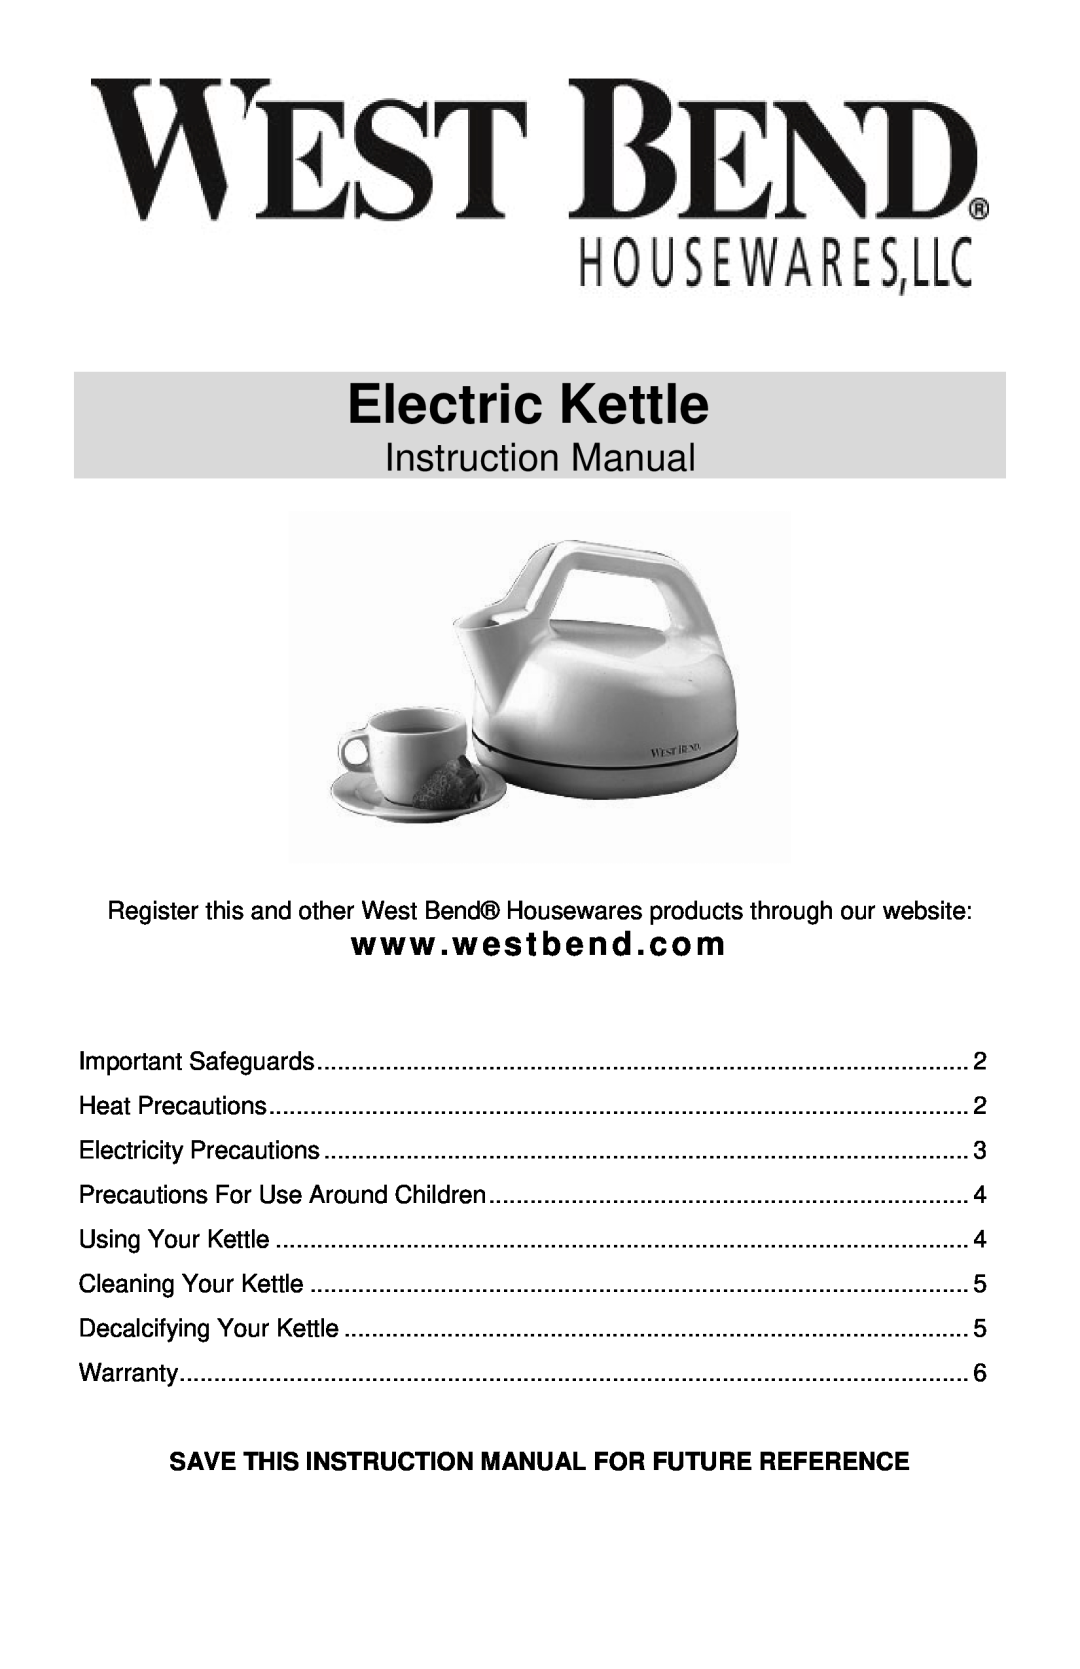 West Bend 6400 instruction manual Electric Kettle, www . westbend . com 